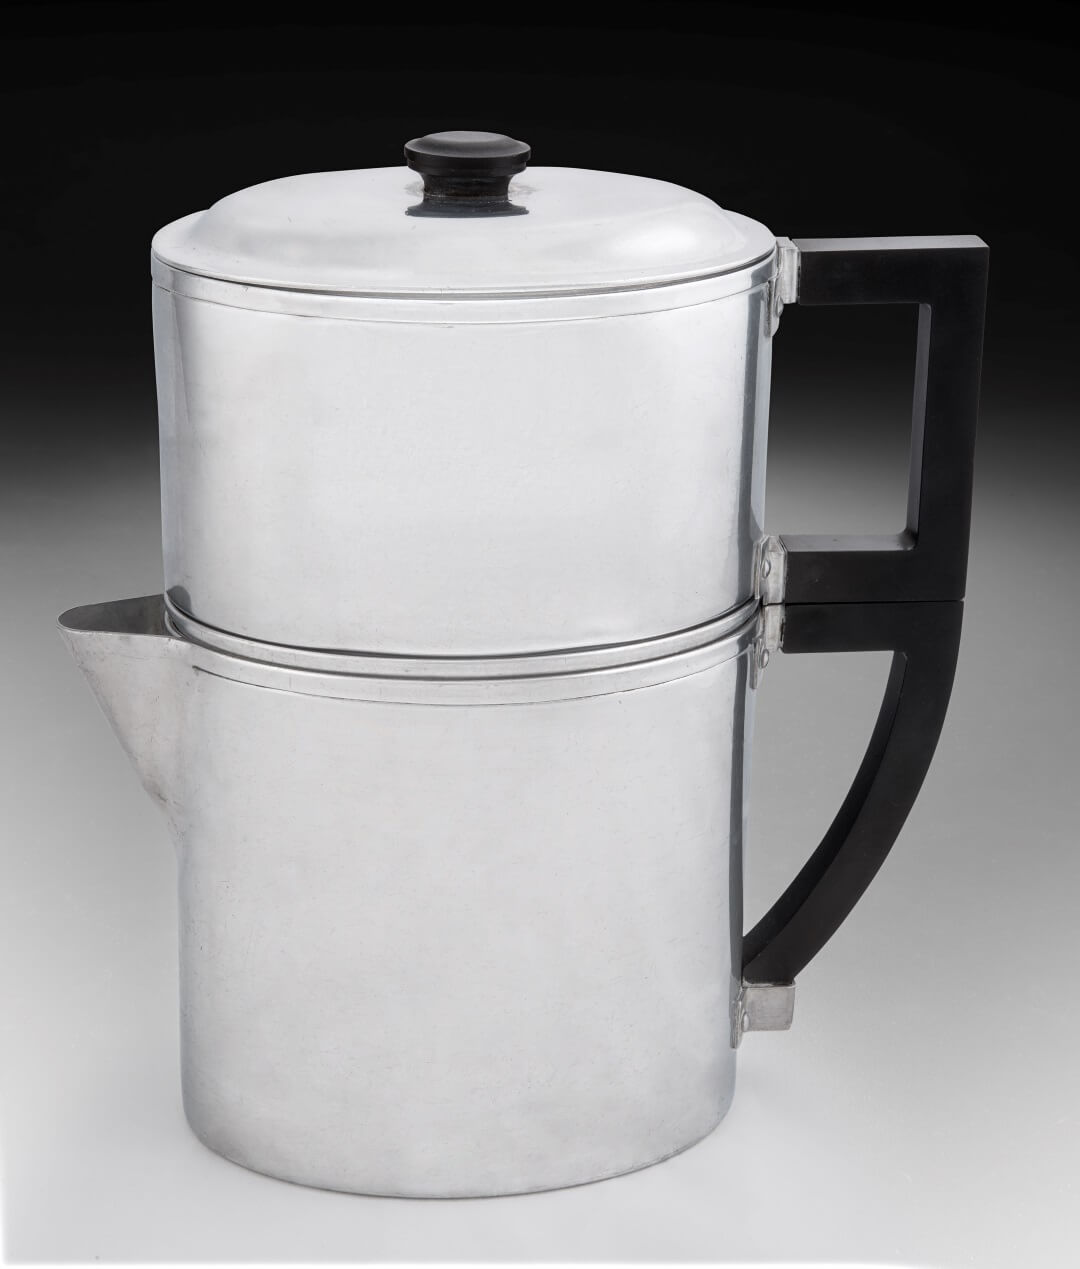 Simple aluminum coffeepot with geometric handle and finial.